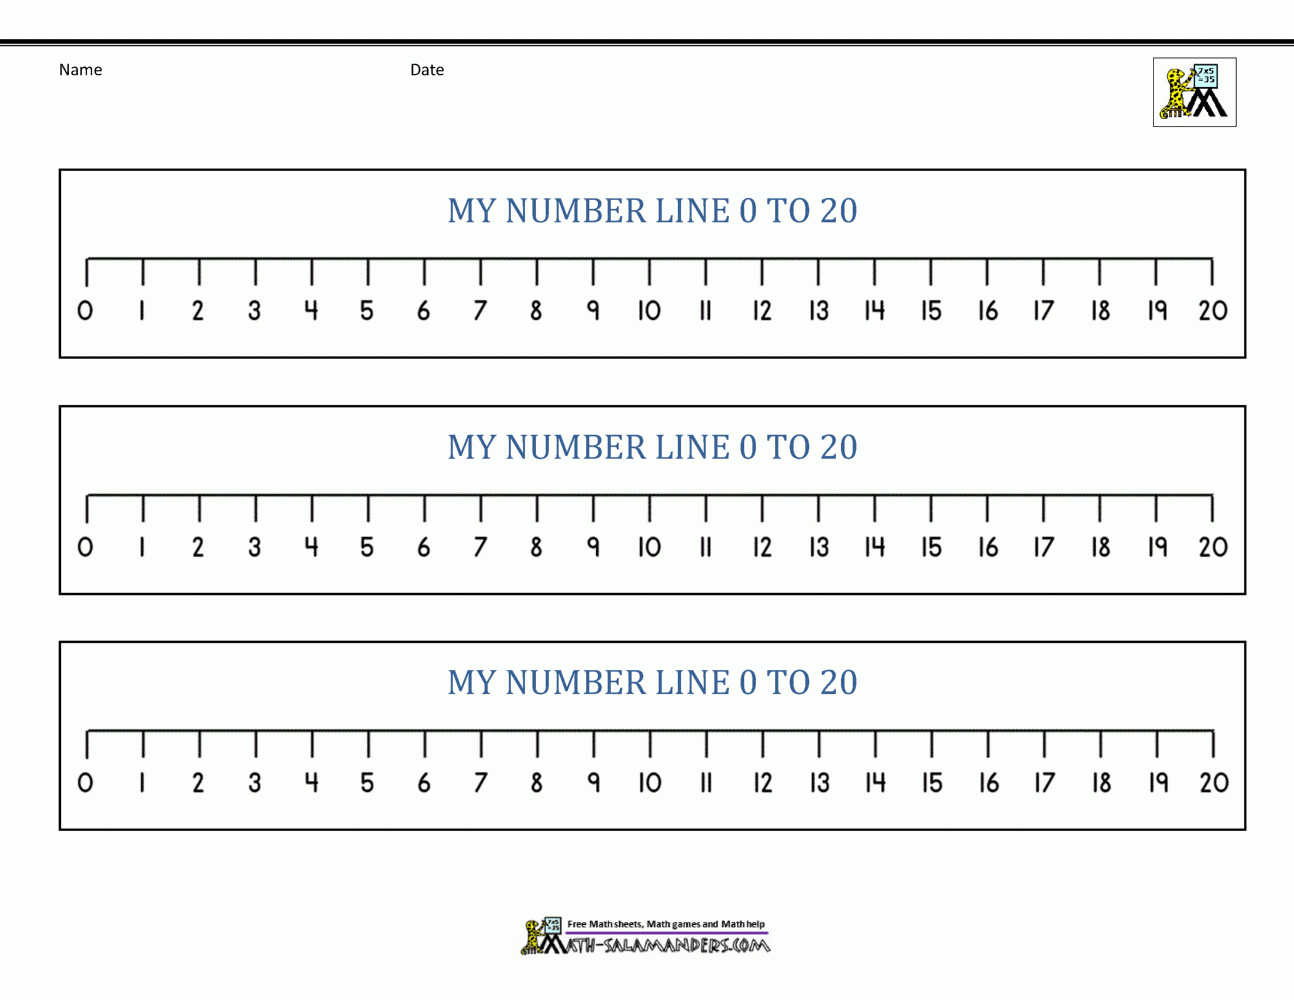 Number Line 0 To 20 Printables - Number Line Negative To Positive Print Free 20